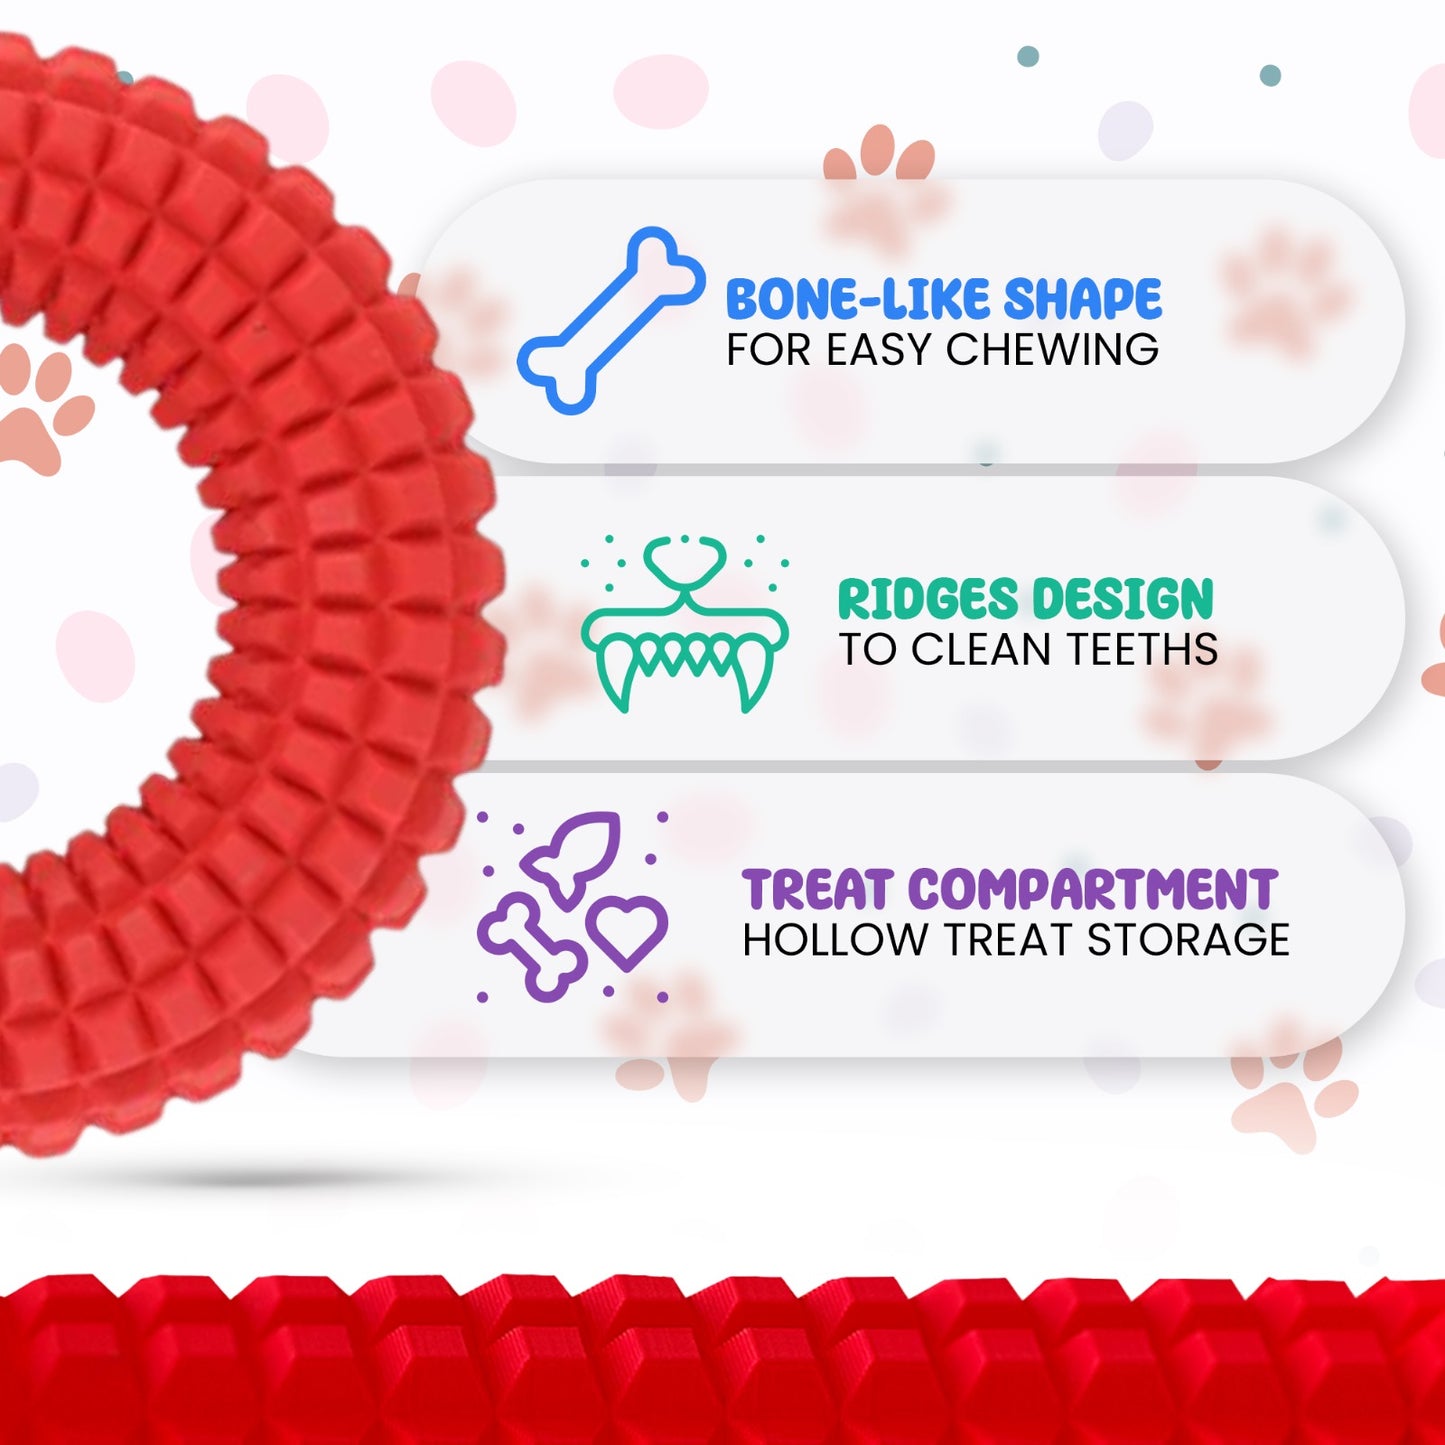 TOME DOG TOYS Ring - Indestructible, Solid Chew Toy